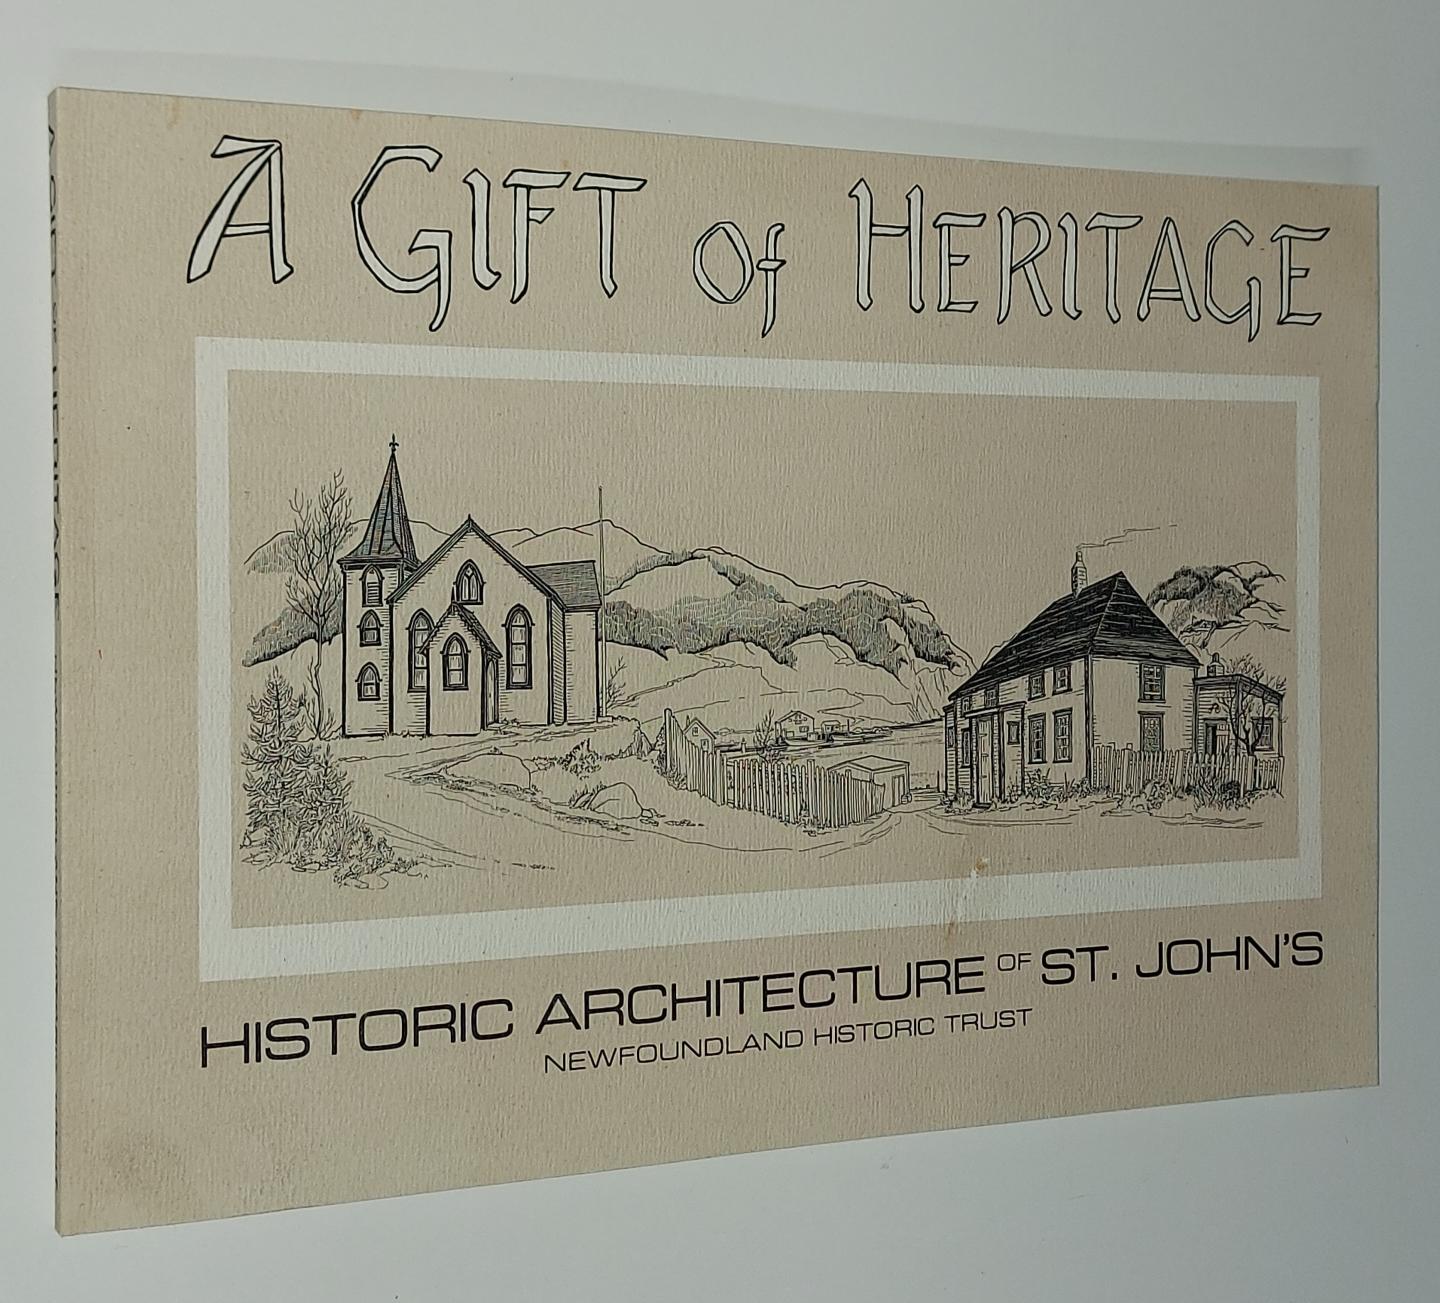 O'Neill, Paul - A gift of Heritage. Historic Architecture of St. John's (Newfoundland Historic Trust Publications volume 1)